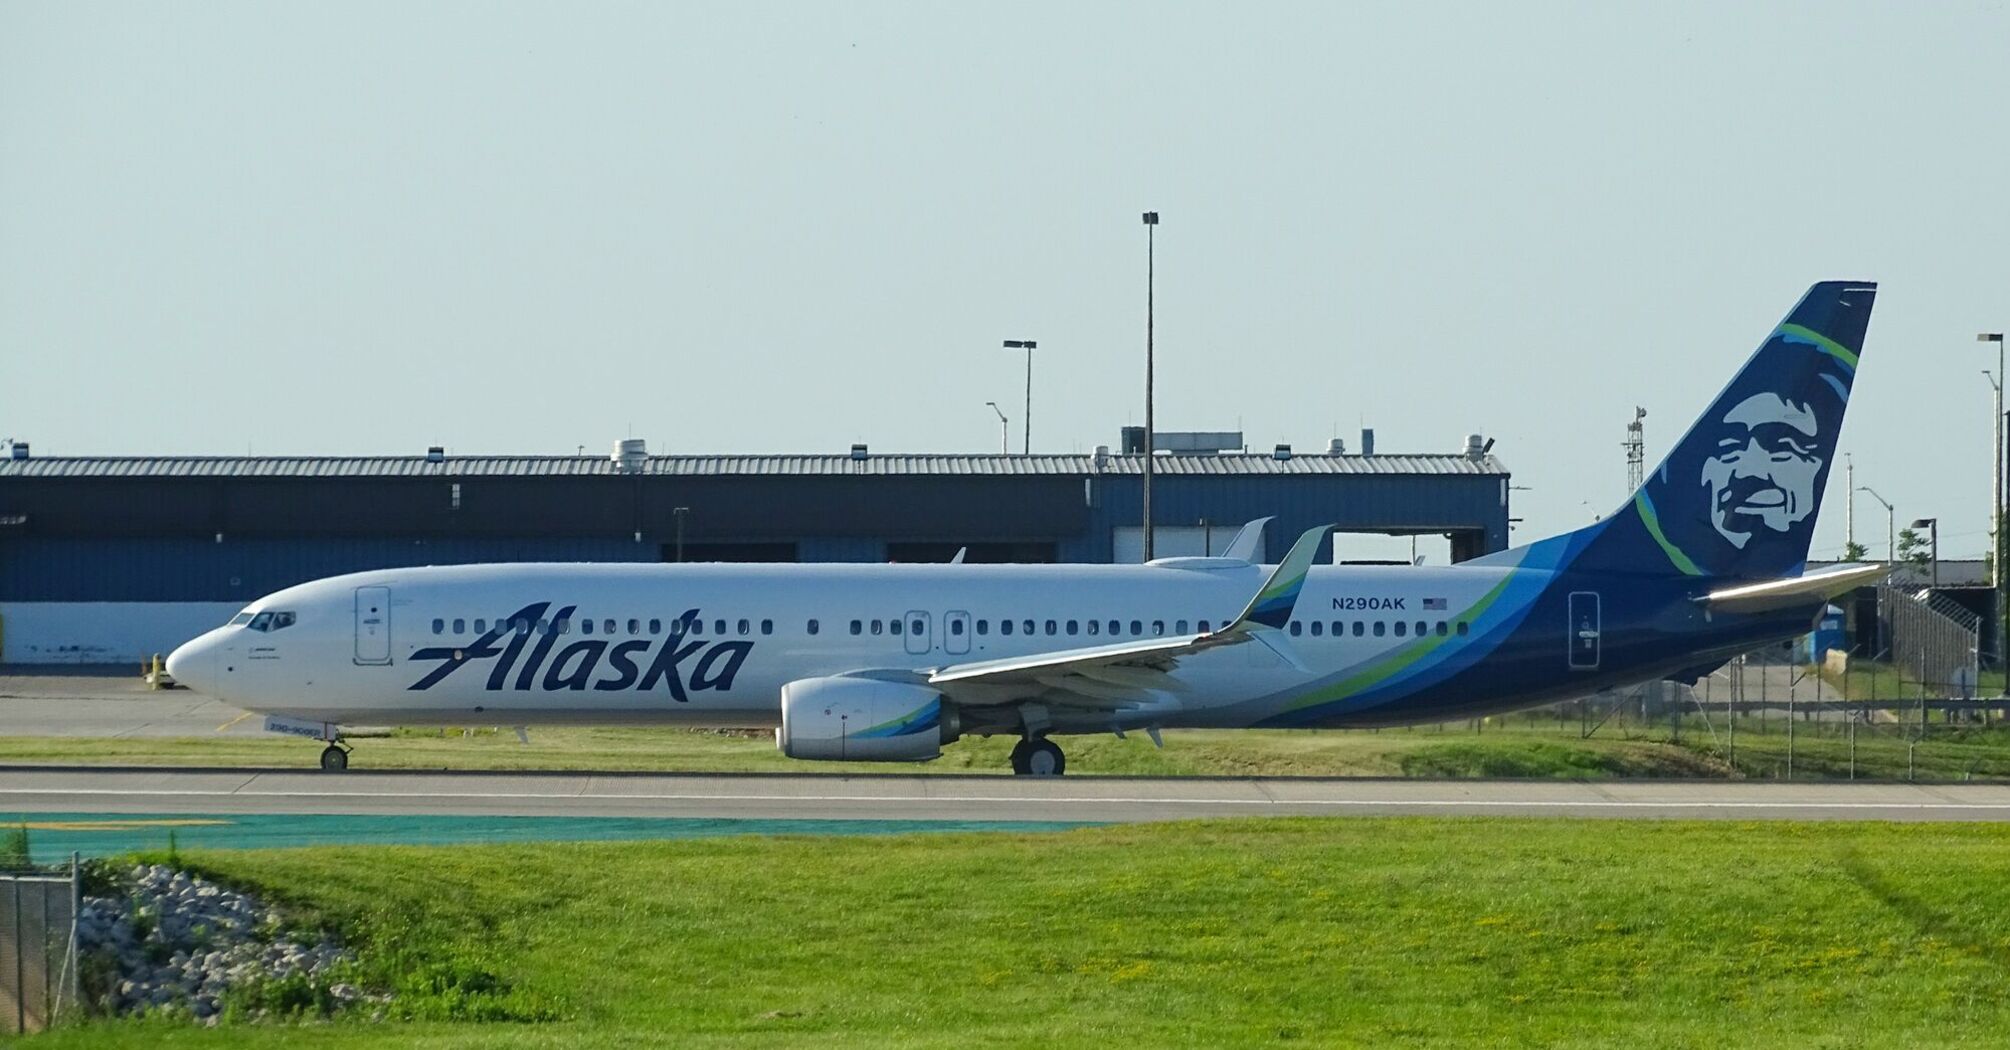 Alaska Airlines aircraft on the tarmac